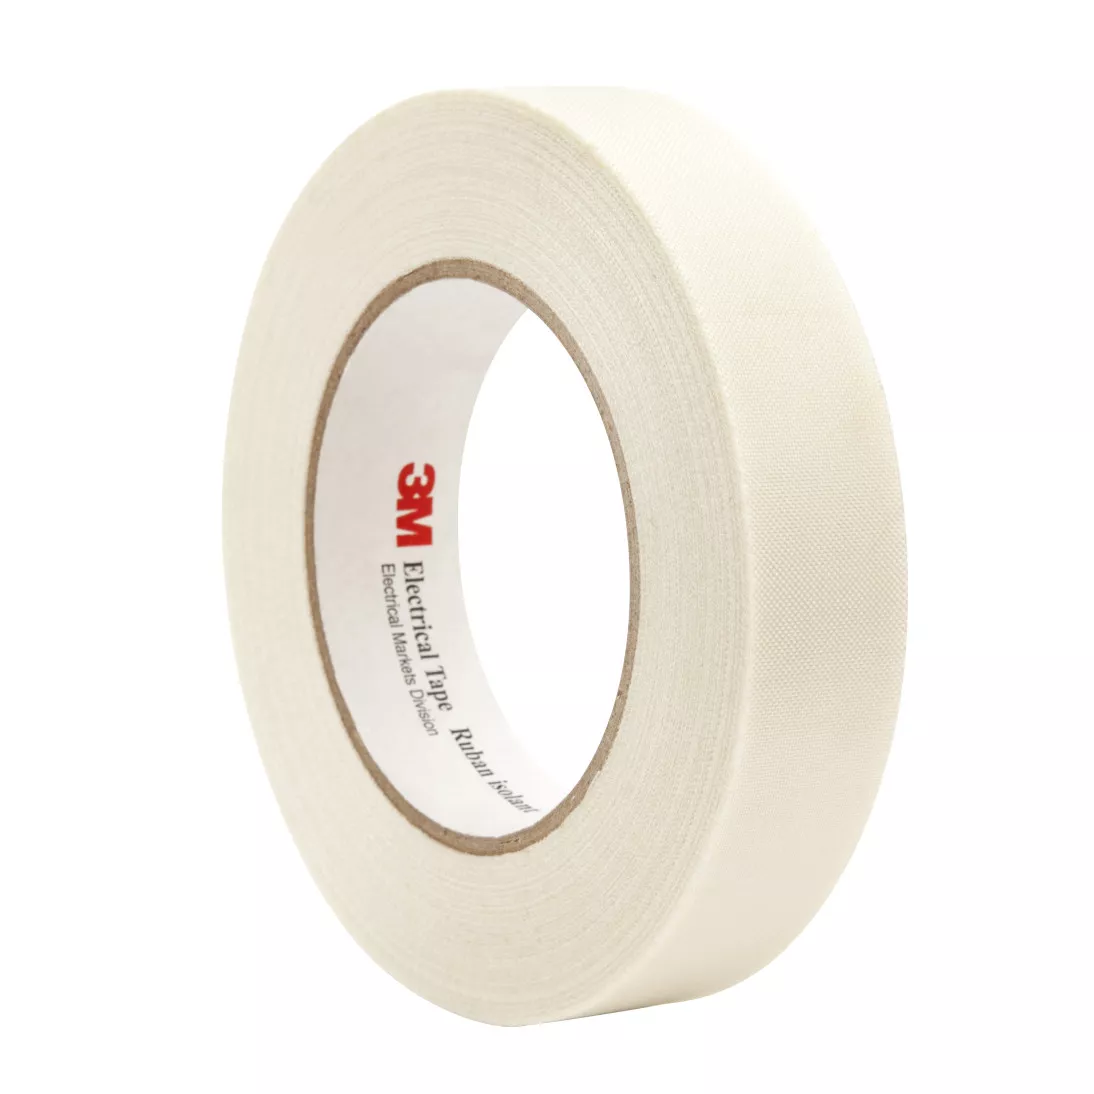 Glass Cloth Electrical Tape BA-31T from 3M Company, 24 in X 60 yds, 3-in
blank plastic core,